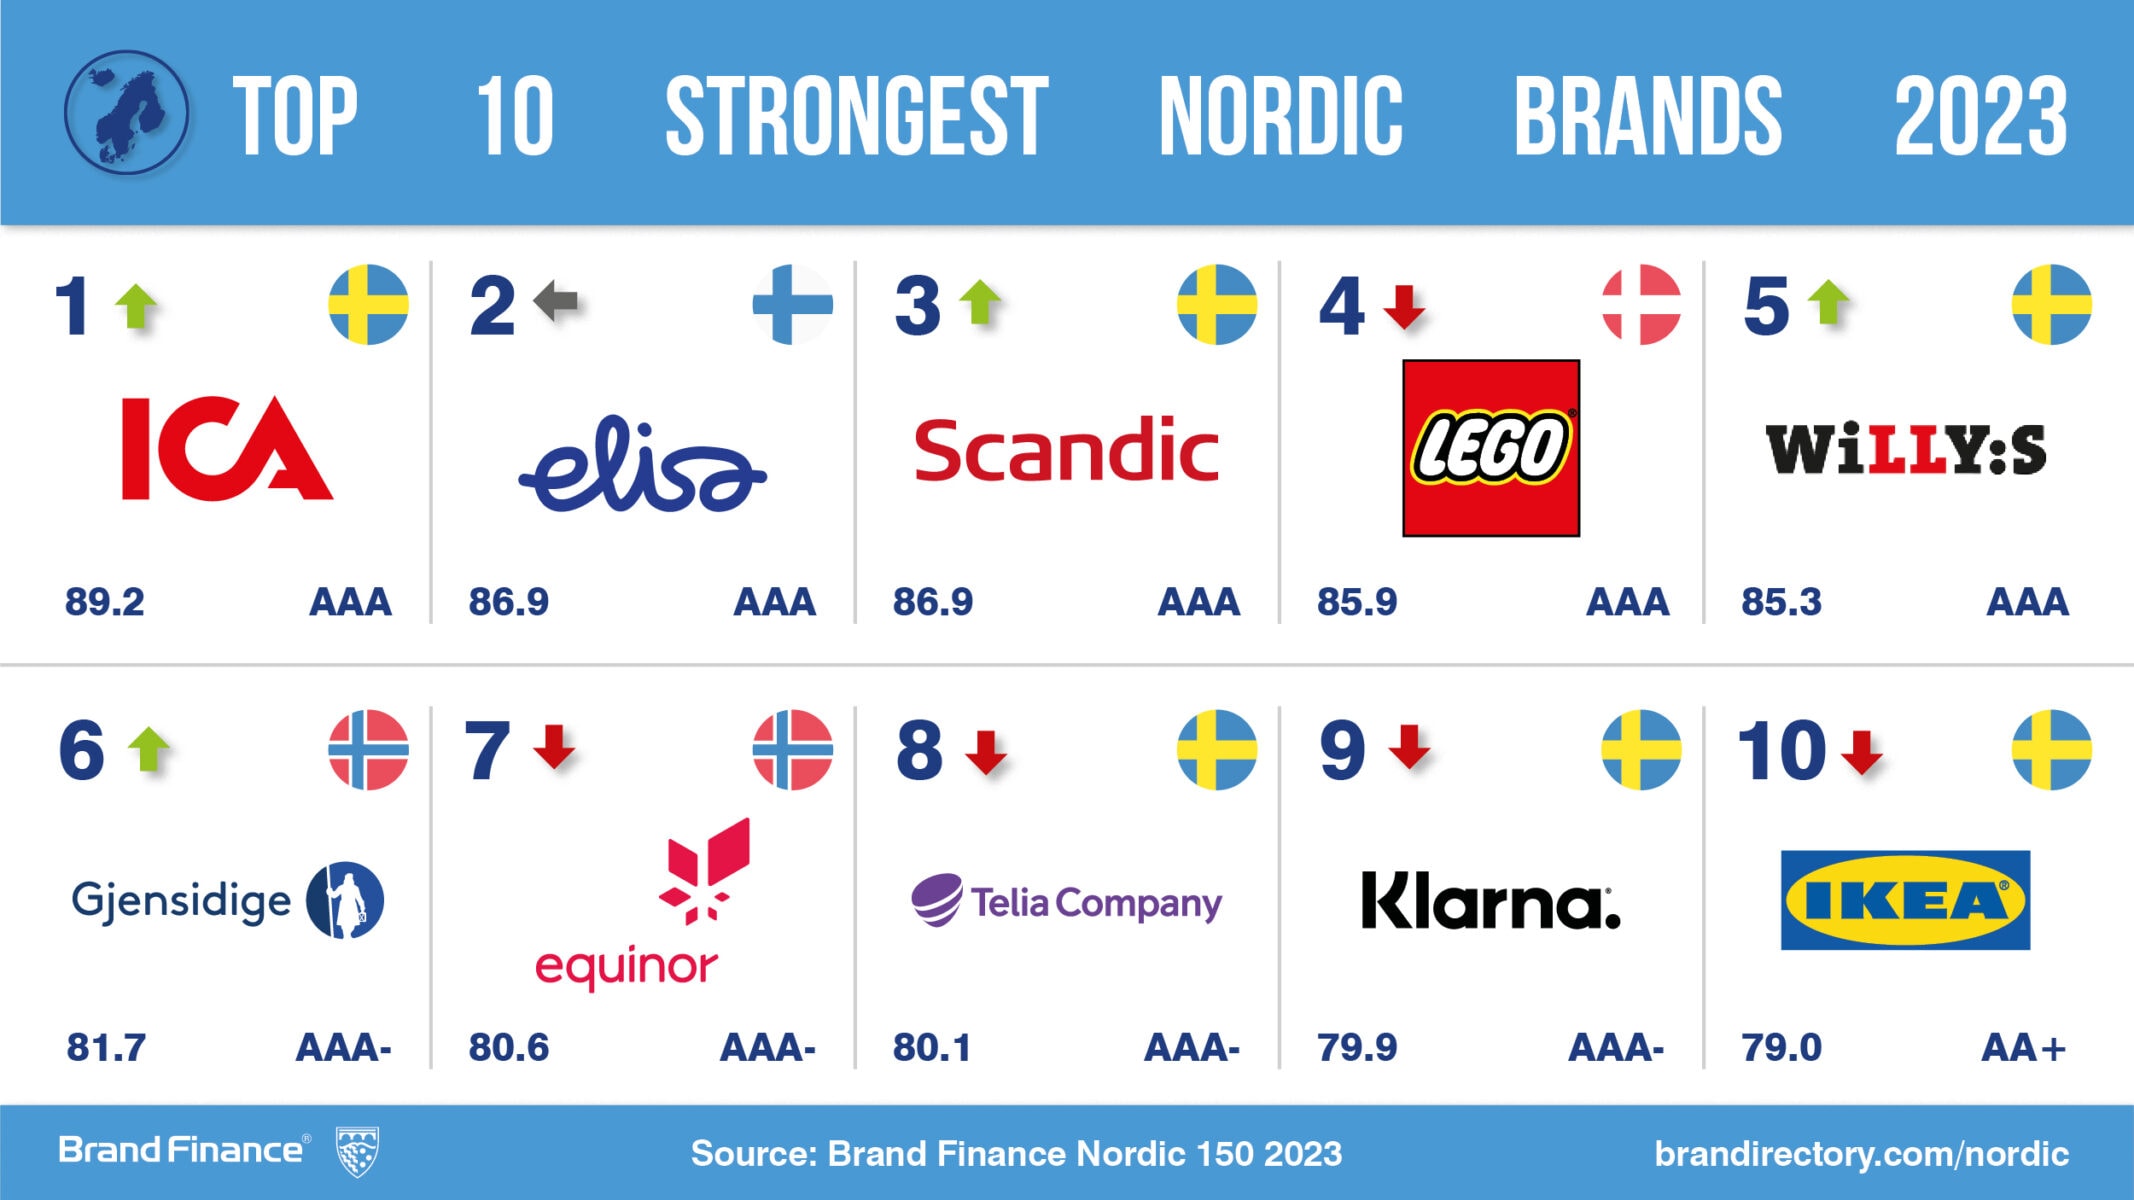 IKEA is reigning champion of Nordic brands but contends with declining brand  strength, Press Release